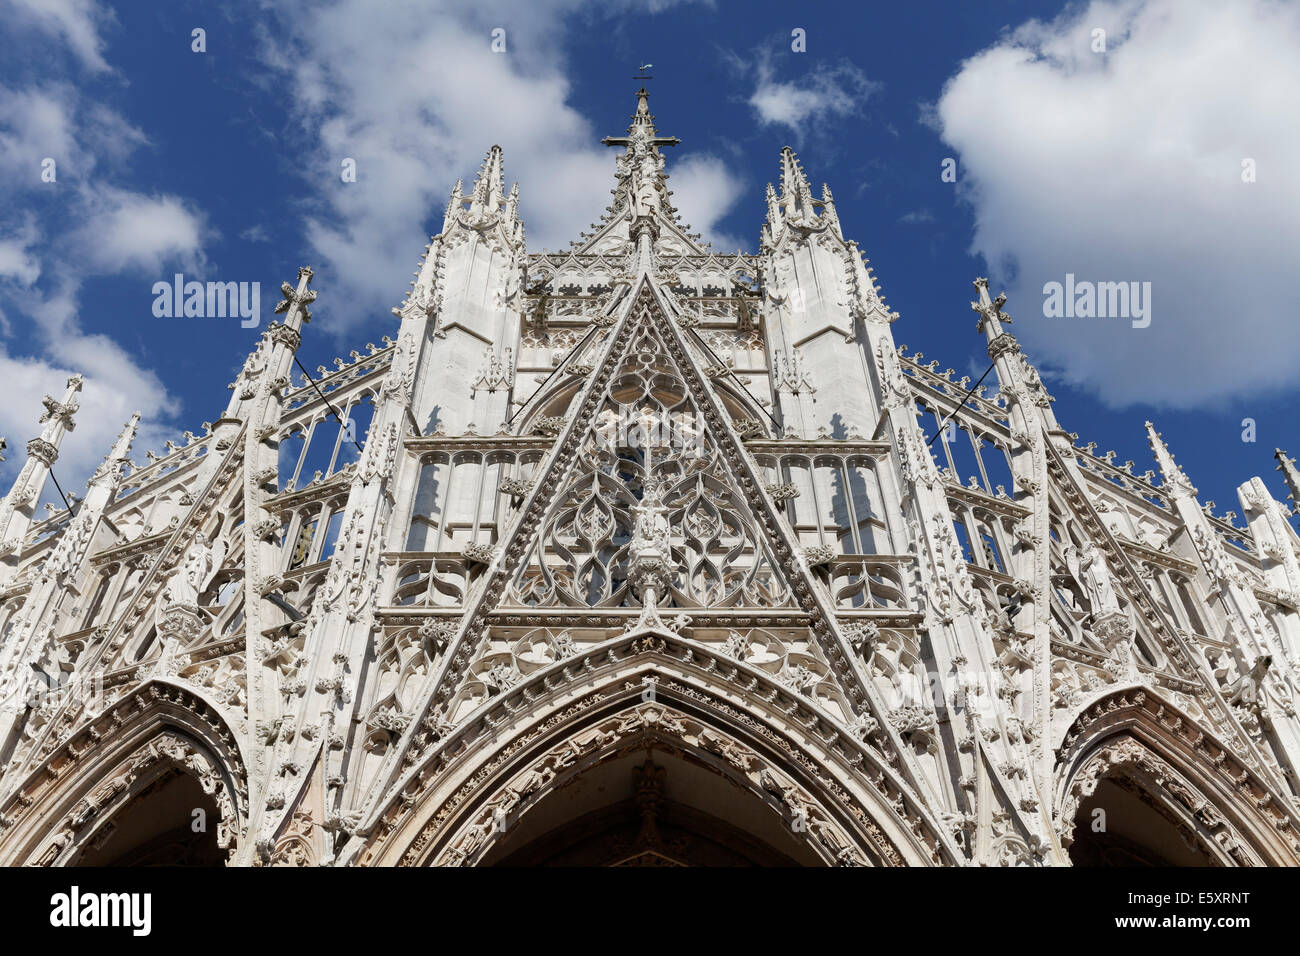 Flamboyant Architecture High Resolution Stock Photography And Images Alamy